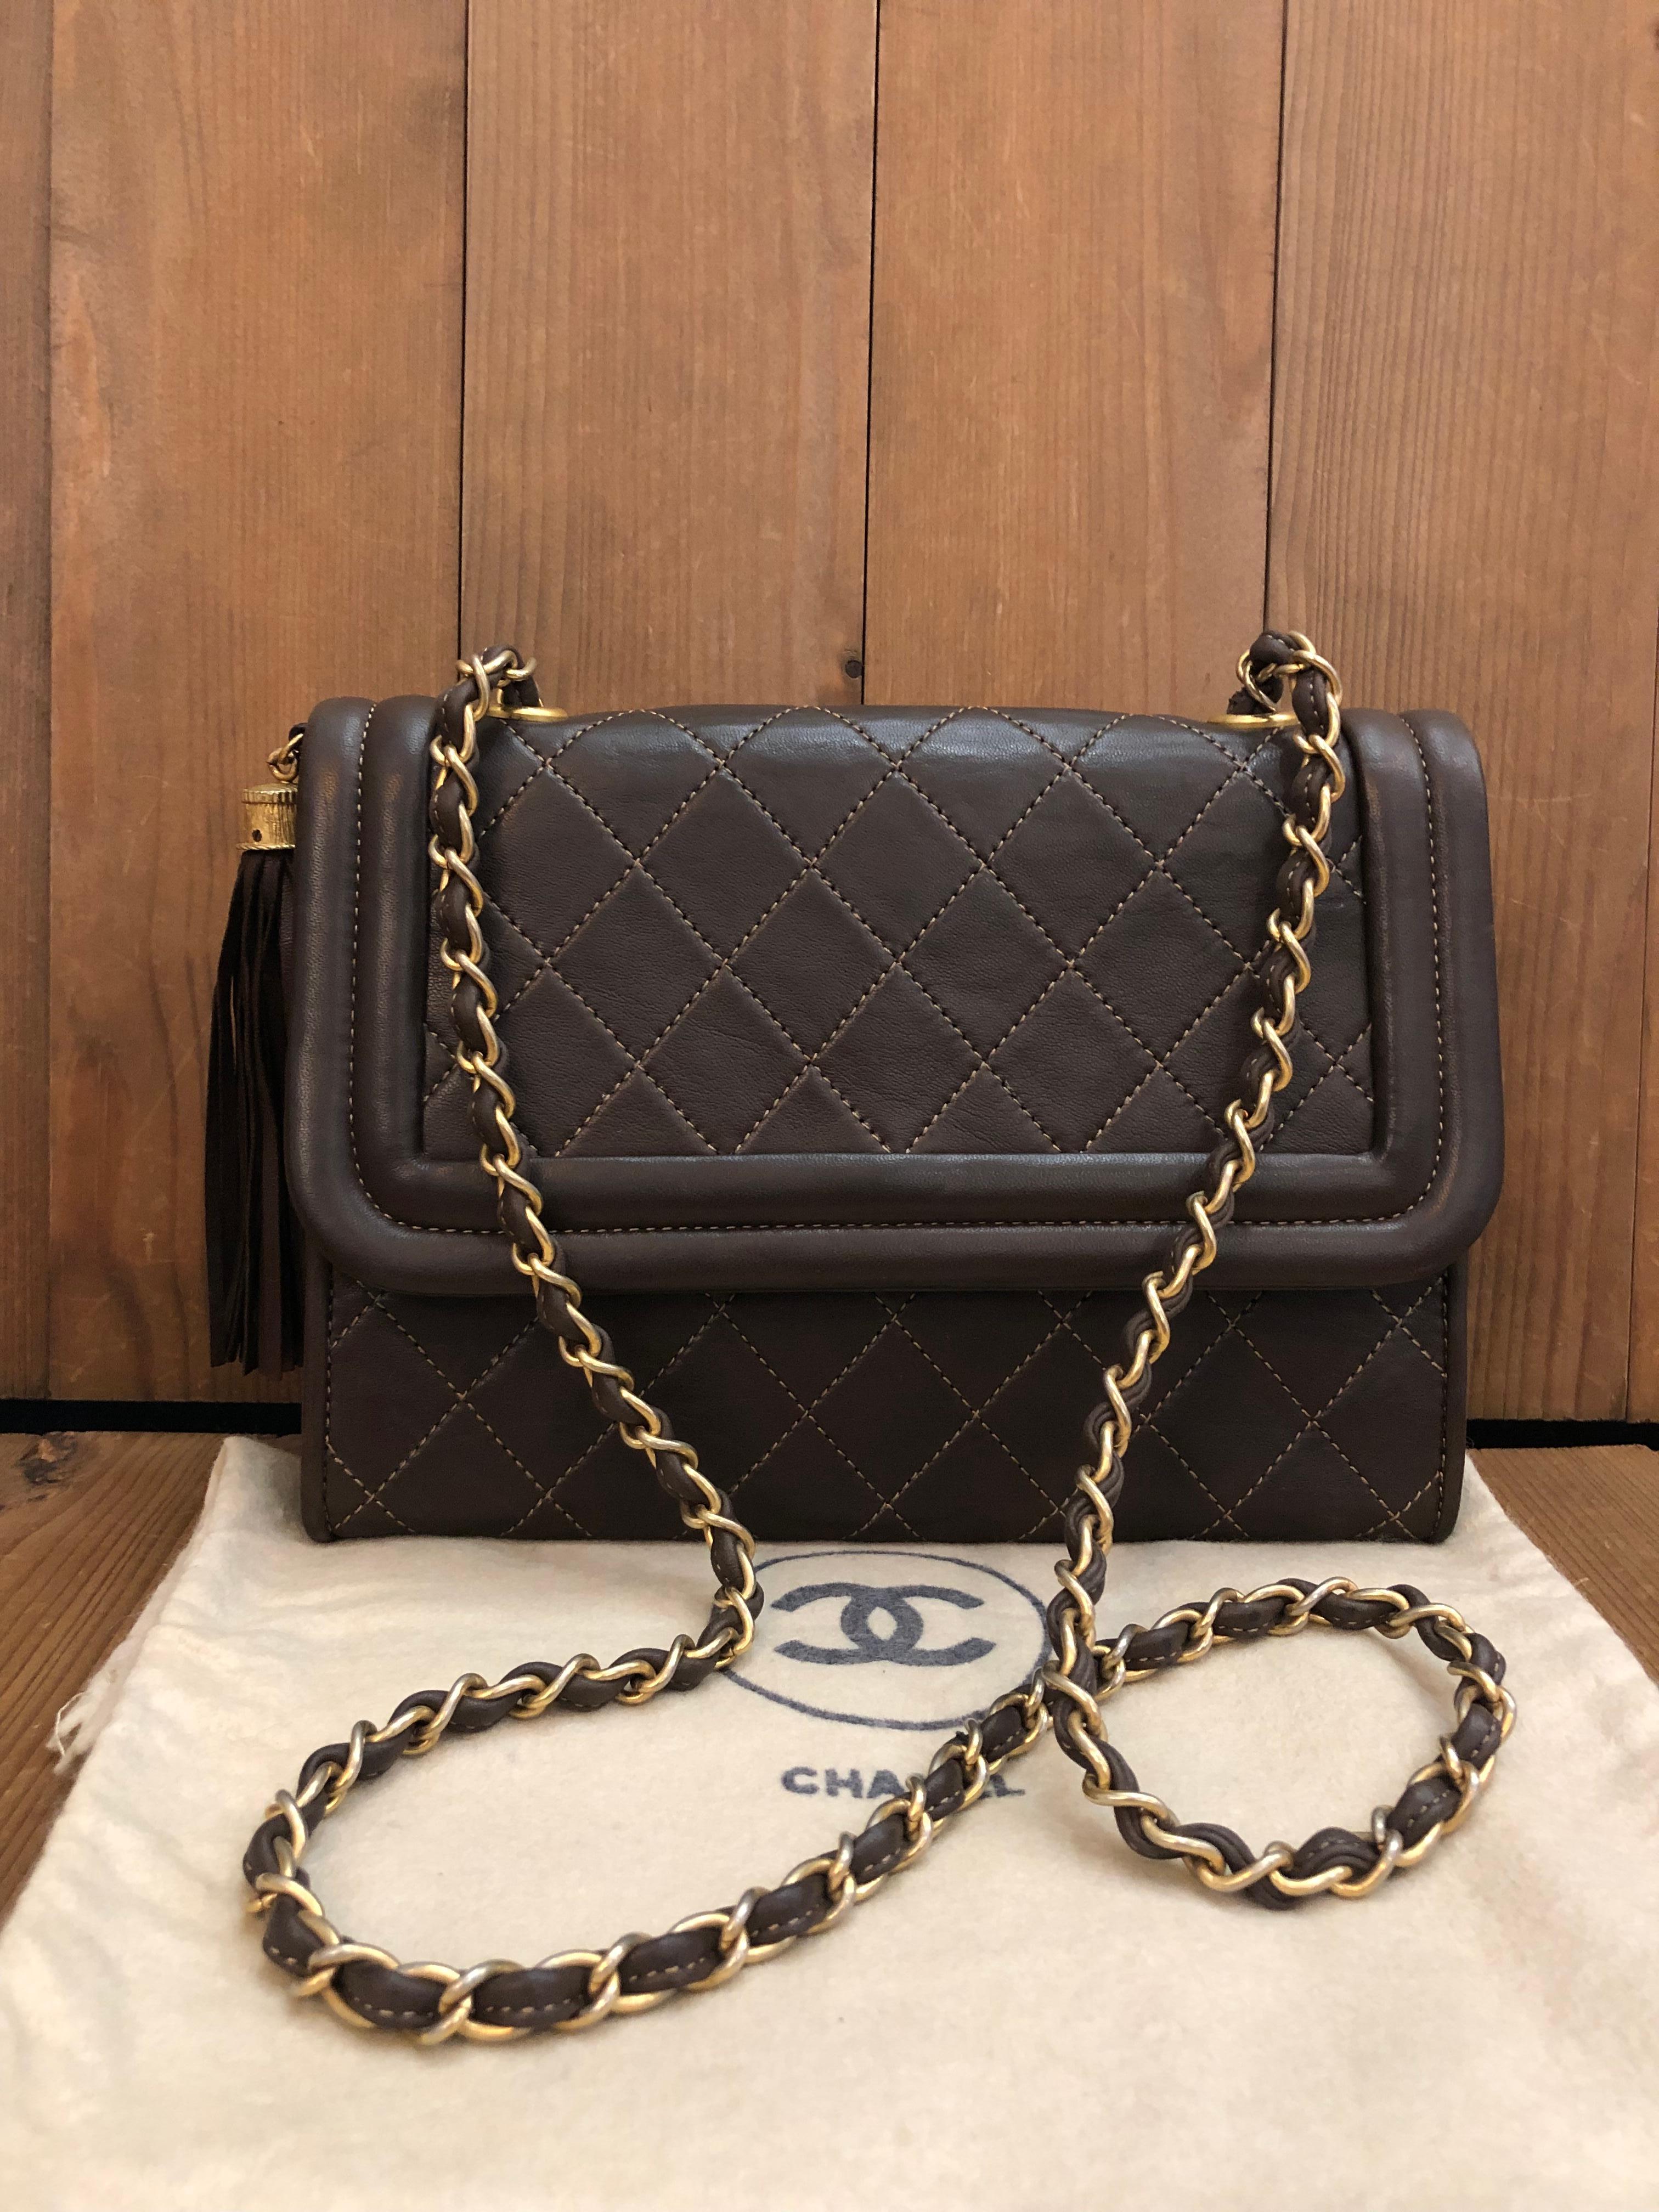 This vintage CHANEL Flap Bag is crafted of diamond quilted lambskin leather in chocolate brown featuring gold toned hardware and adorned with a tassel of the same leather. This Chanel flap bag features a gold toned chain interlaced with brown